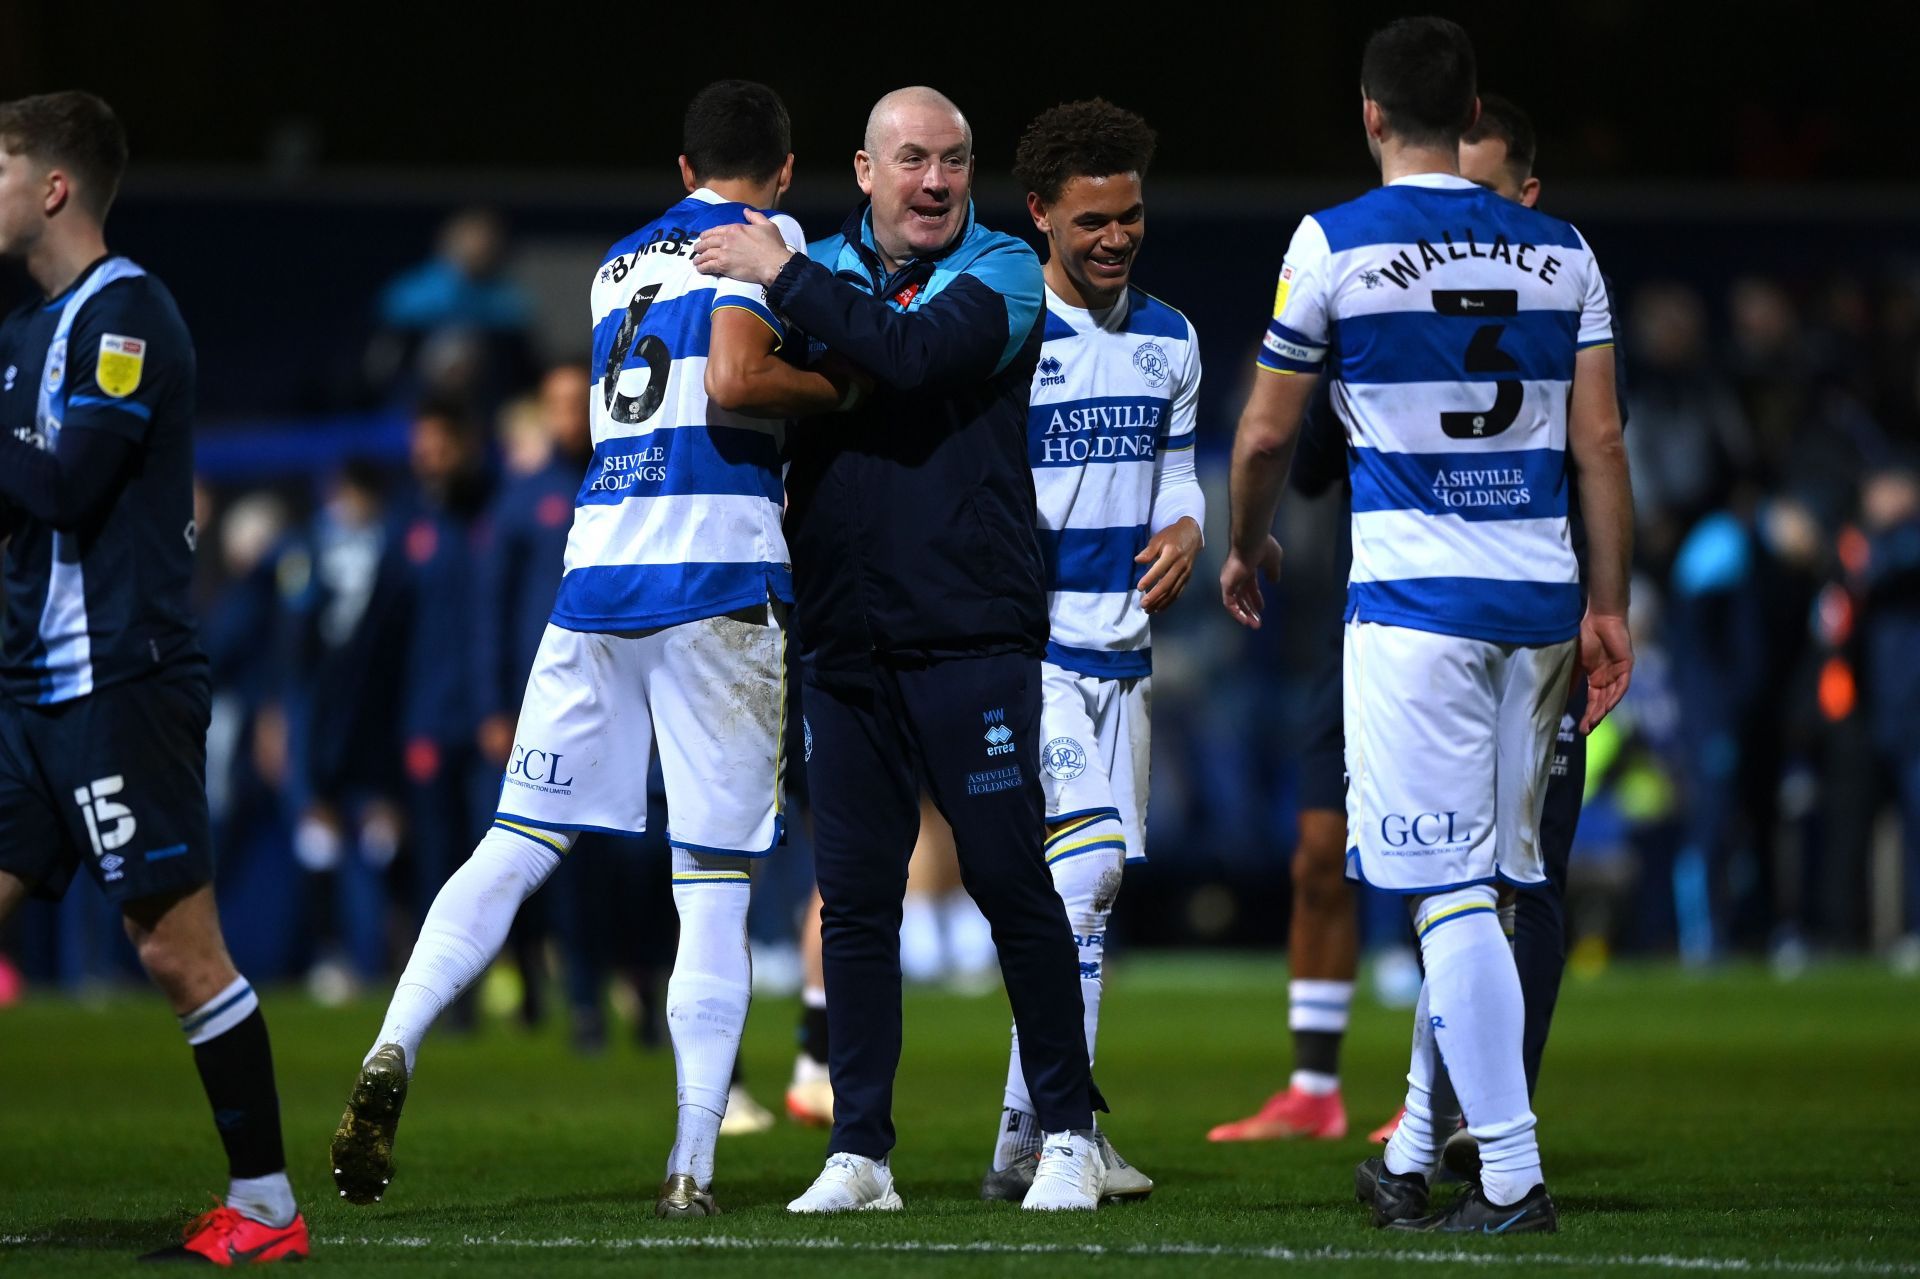 QPR are looking to continue their form